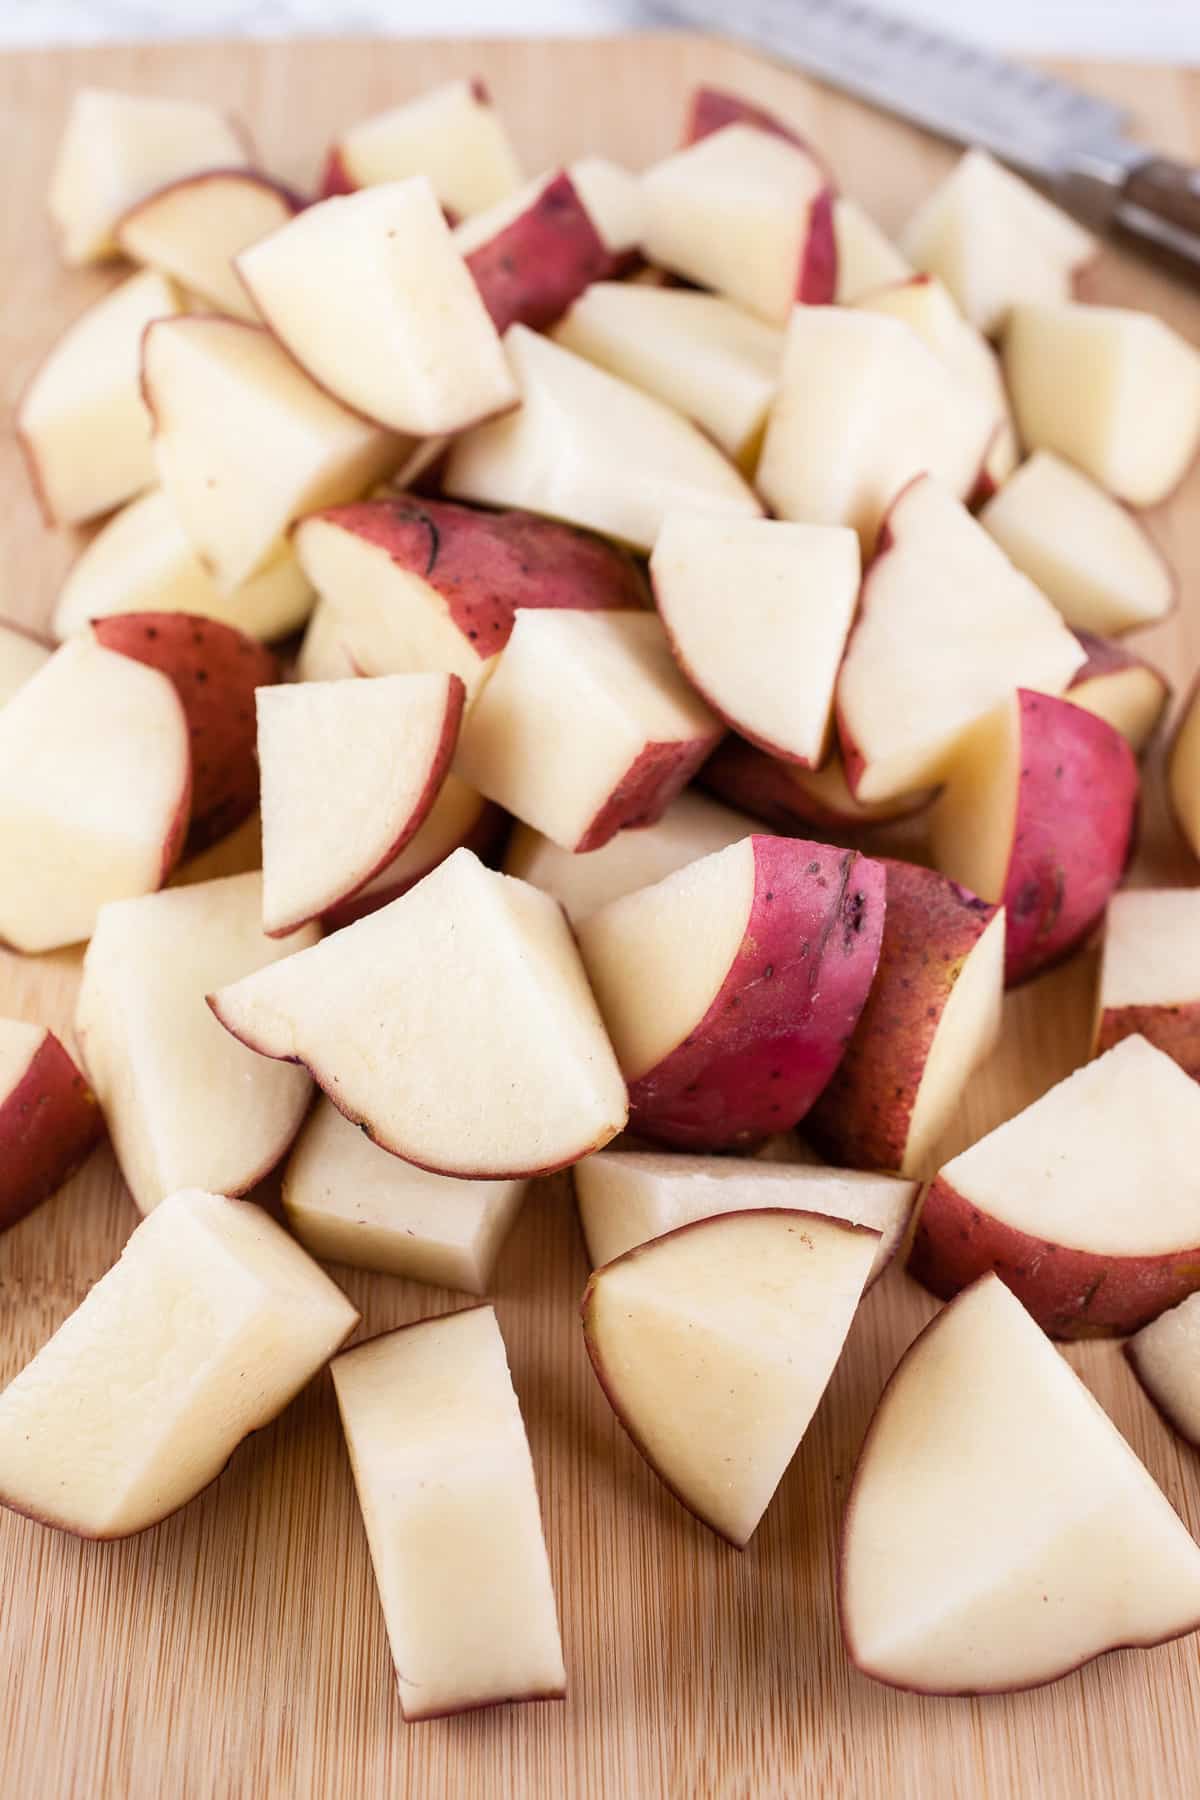 Diced red potatoes on wooden cutting board with knife.